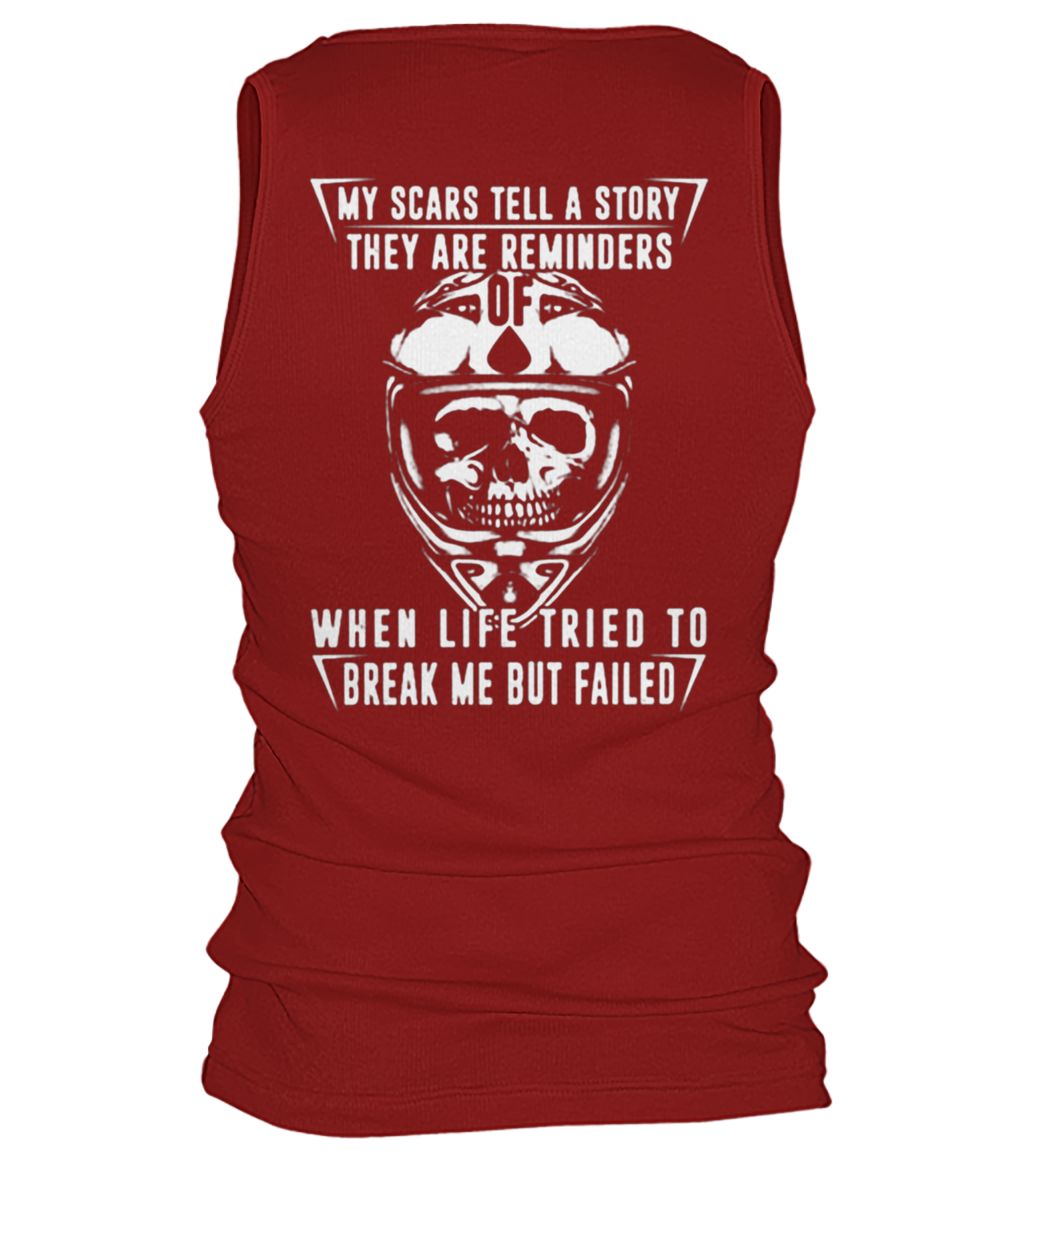 My scars tell a story they are reminders of when life tried to break me but failed men's tank top